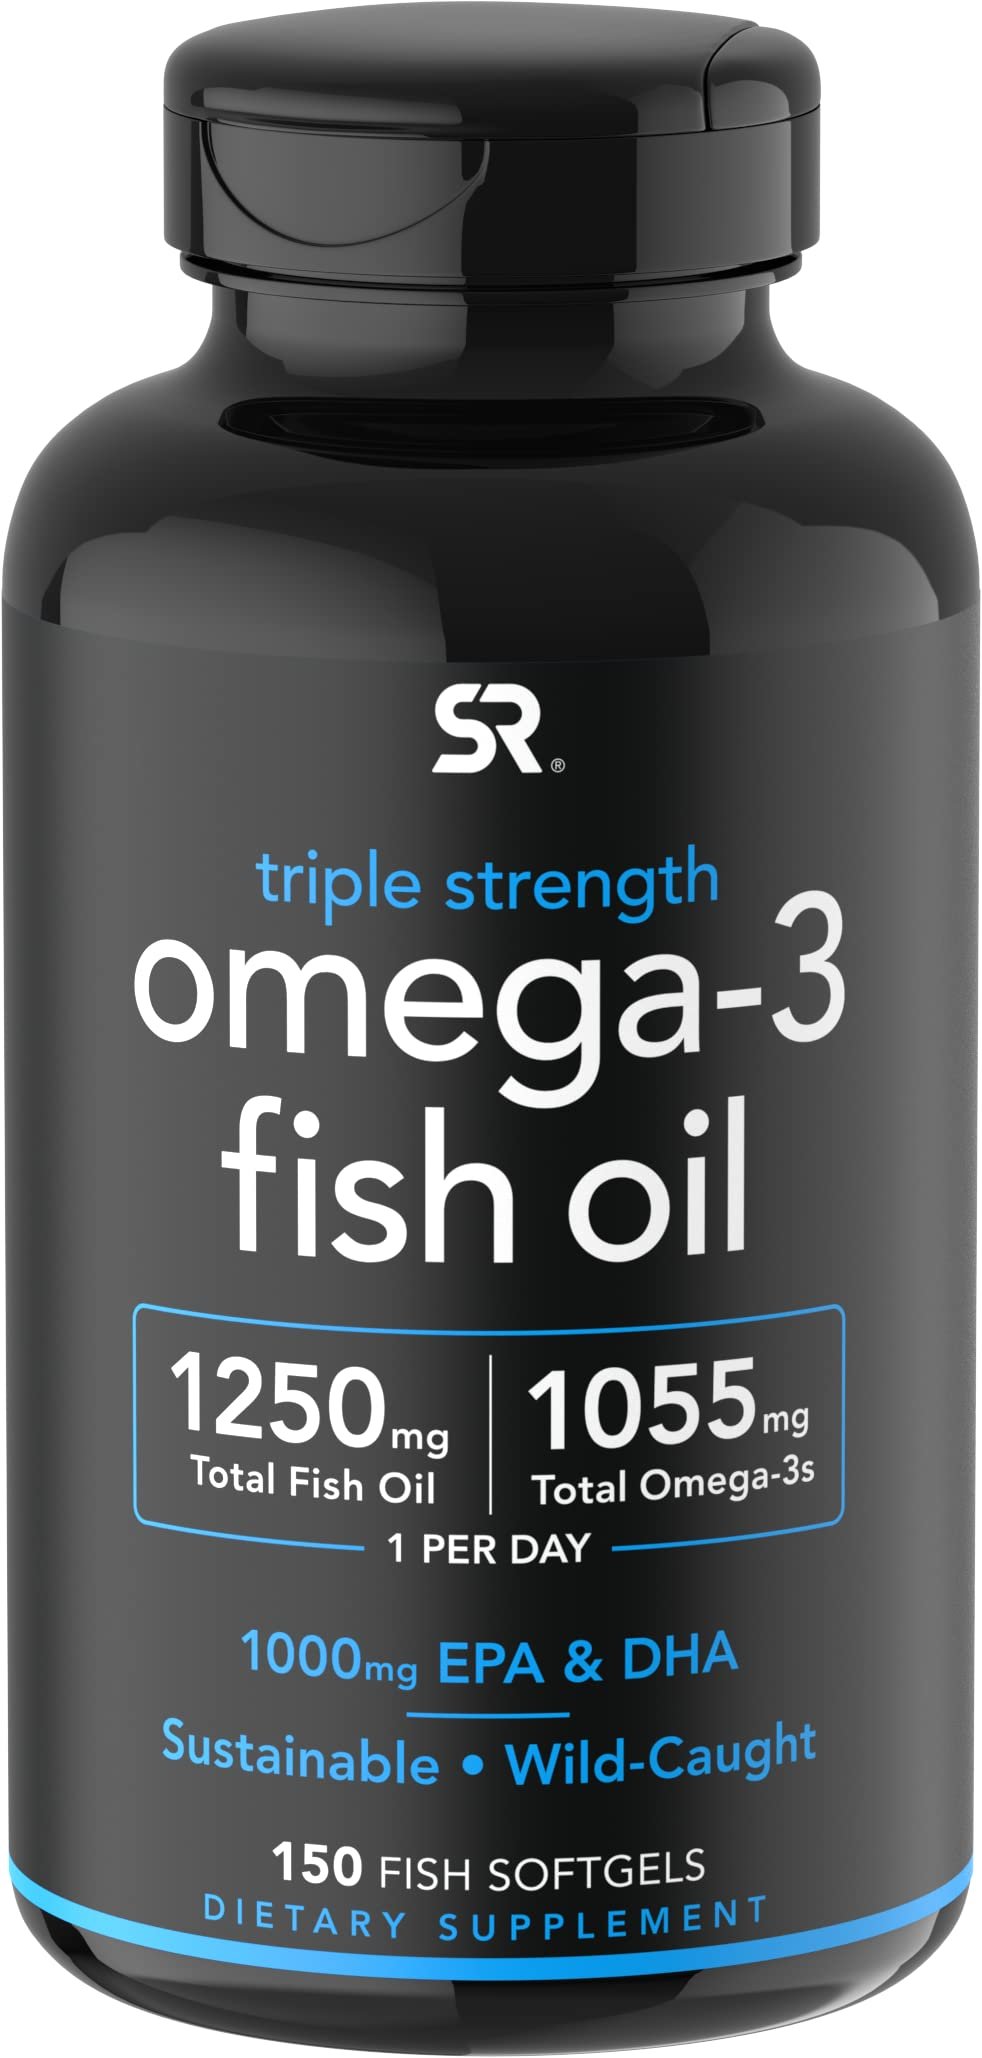 Sports Research Triple Strength Omega-3 Fish Oil